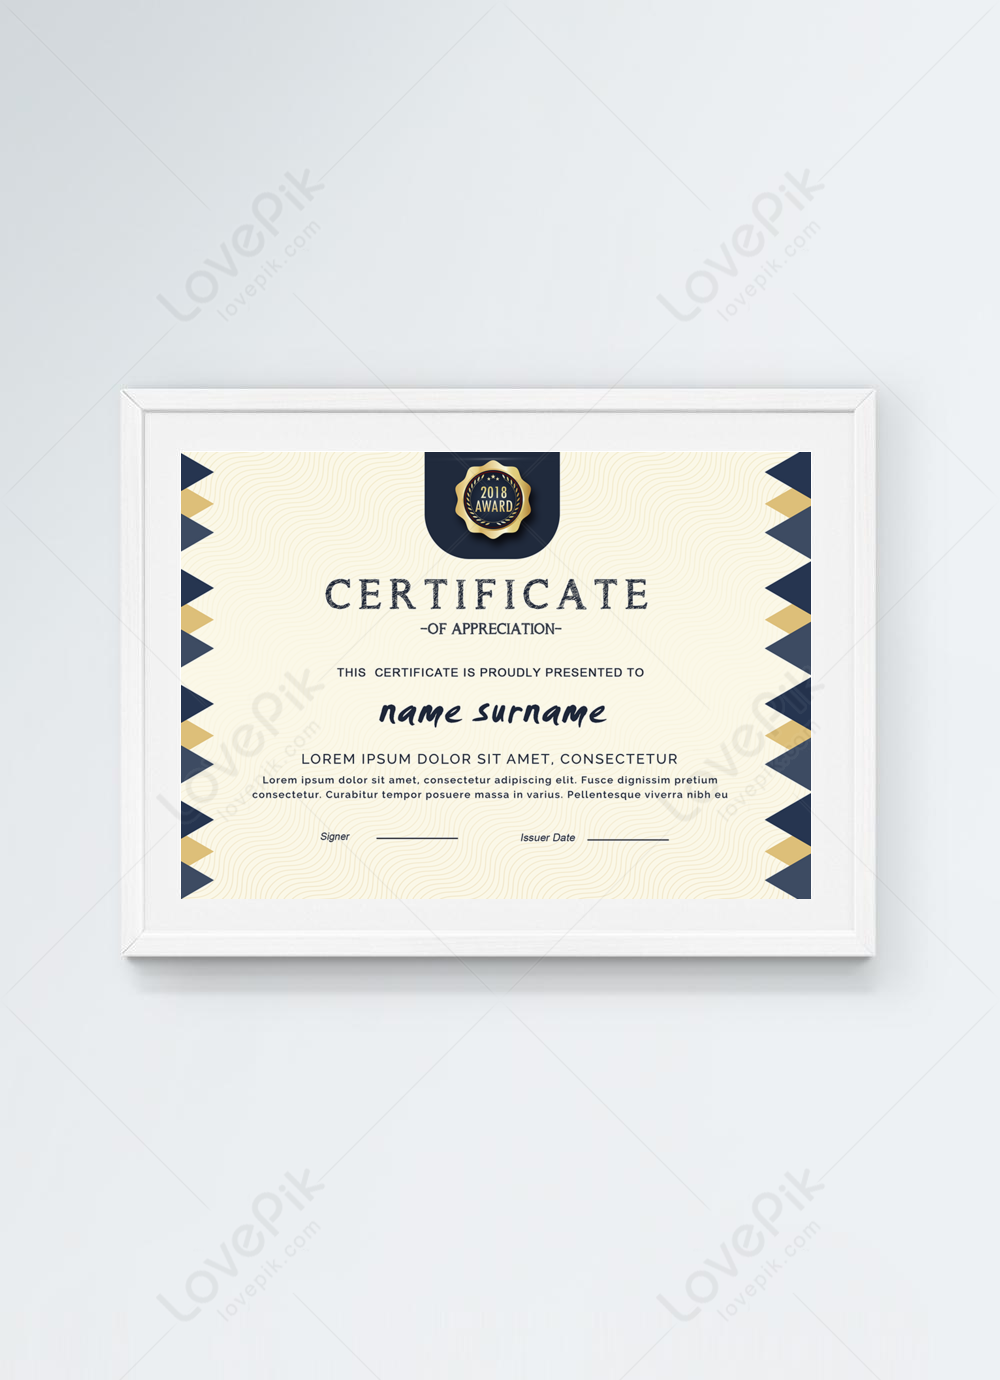 Fashion certificate template image_picture free download 463662151 ...